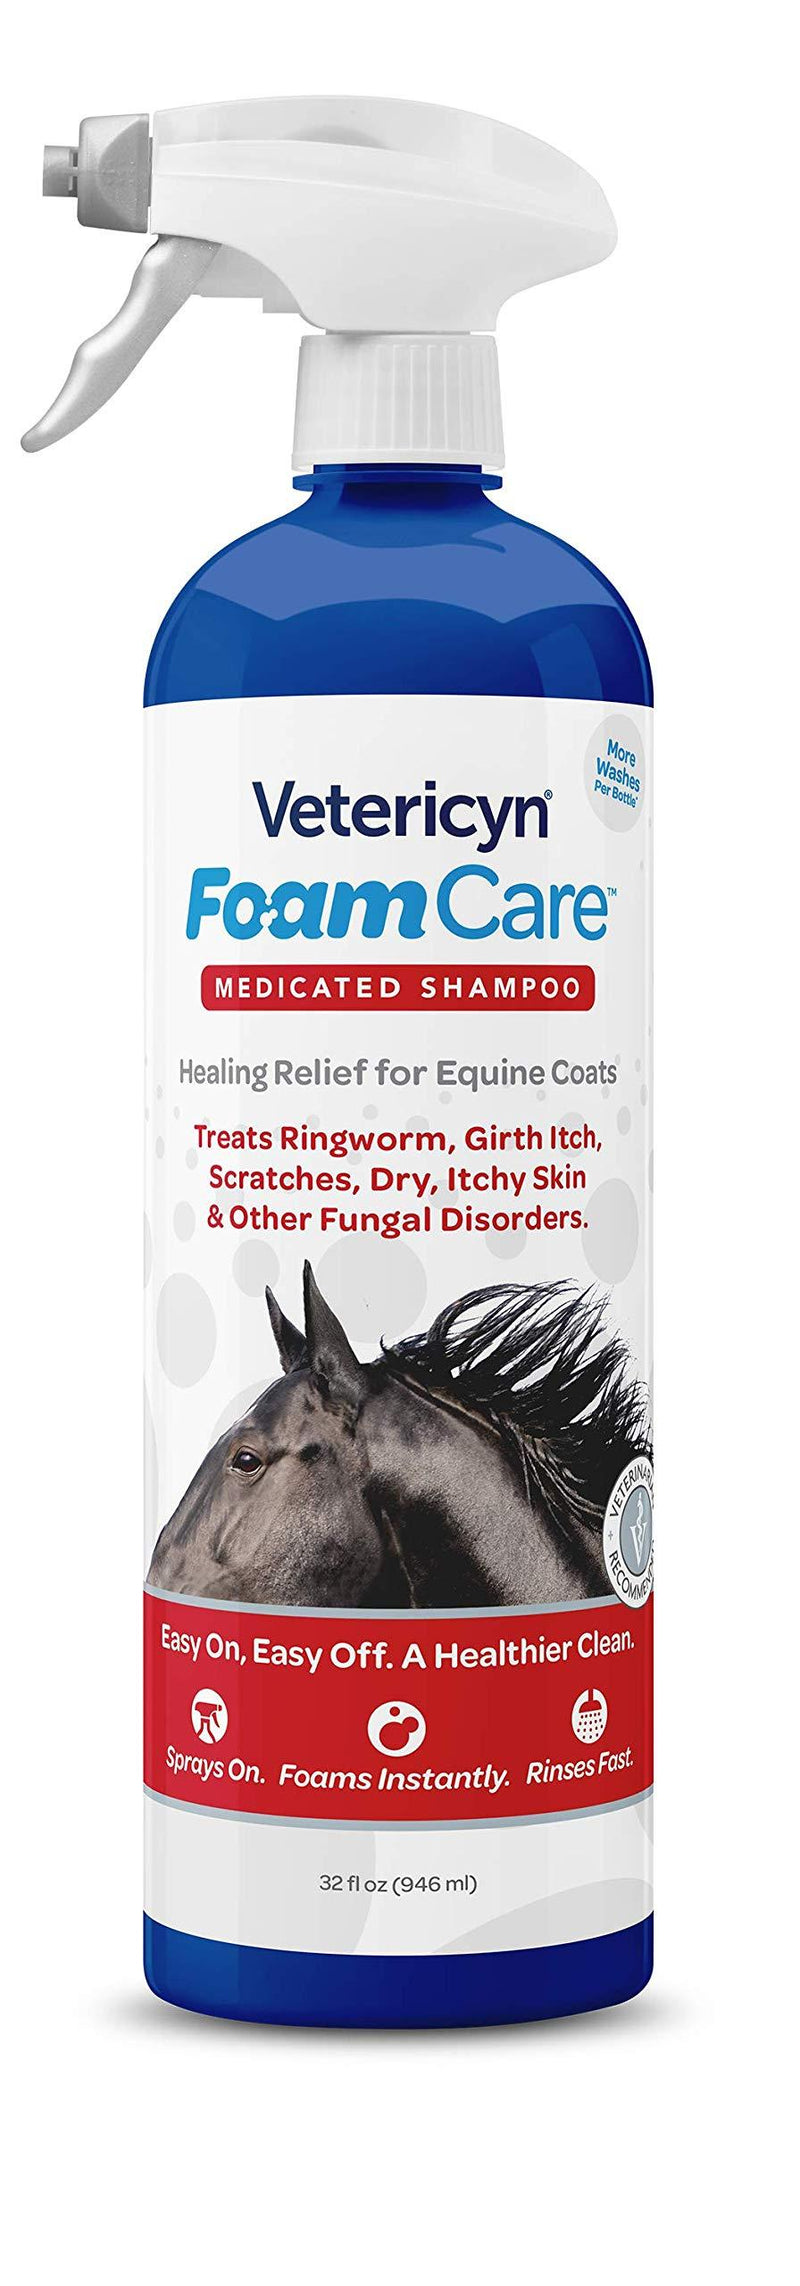 [Australia] - Vetericyn FoamCare Medicated Horse Shampoo | Healing Relief Antifungal Equine Shampoo - Sulfate Free, Paraben Free - Cleans, Moisturizes, and Conditions Horse's Coat - Instant Foam Shampoo - 32-ounce 